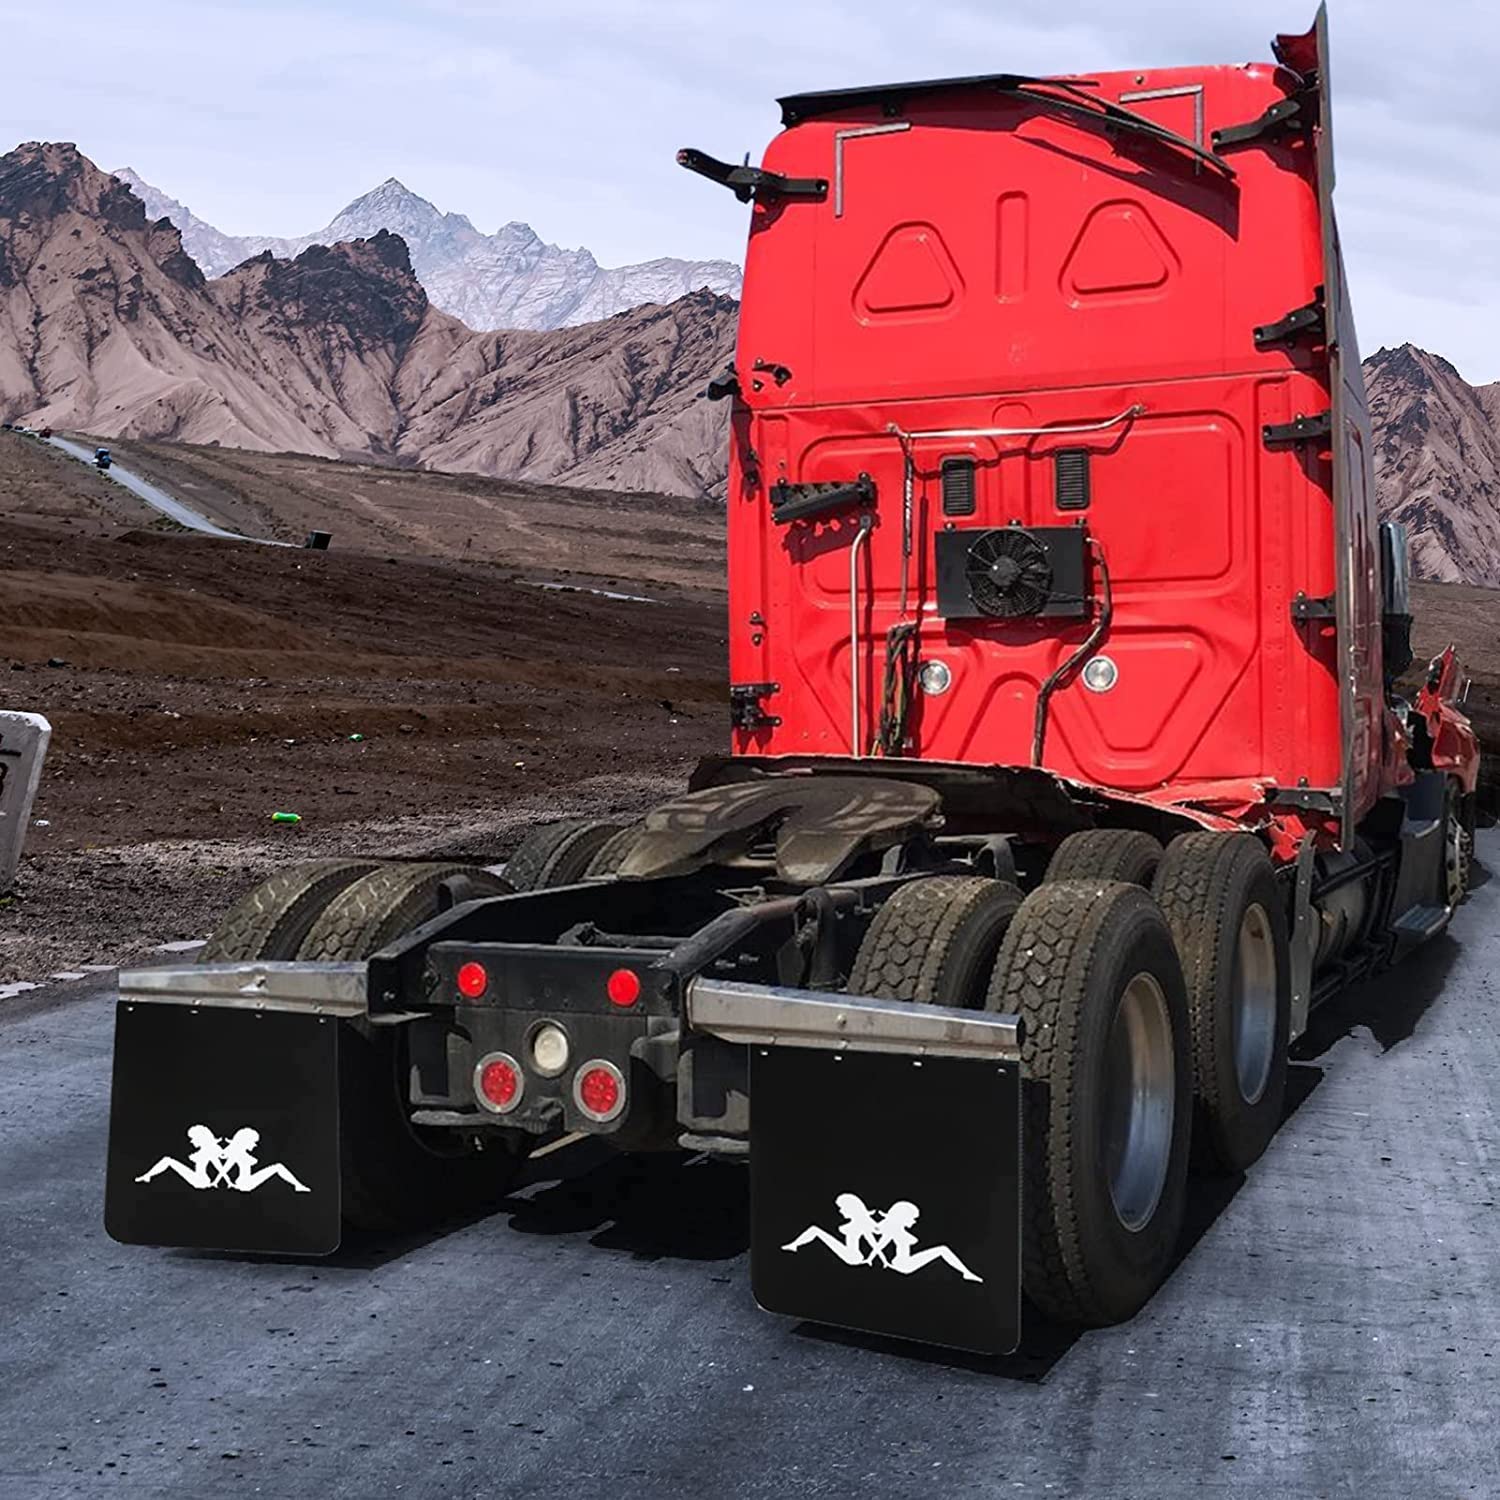 The back of a red semi-truck parked in front of a mountain range with the silhouette of a girl visible on its mudflaps.